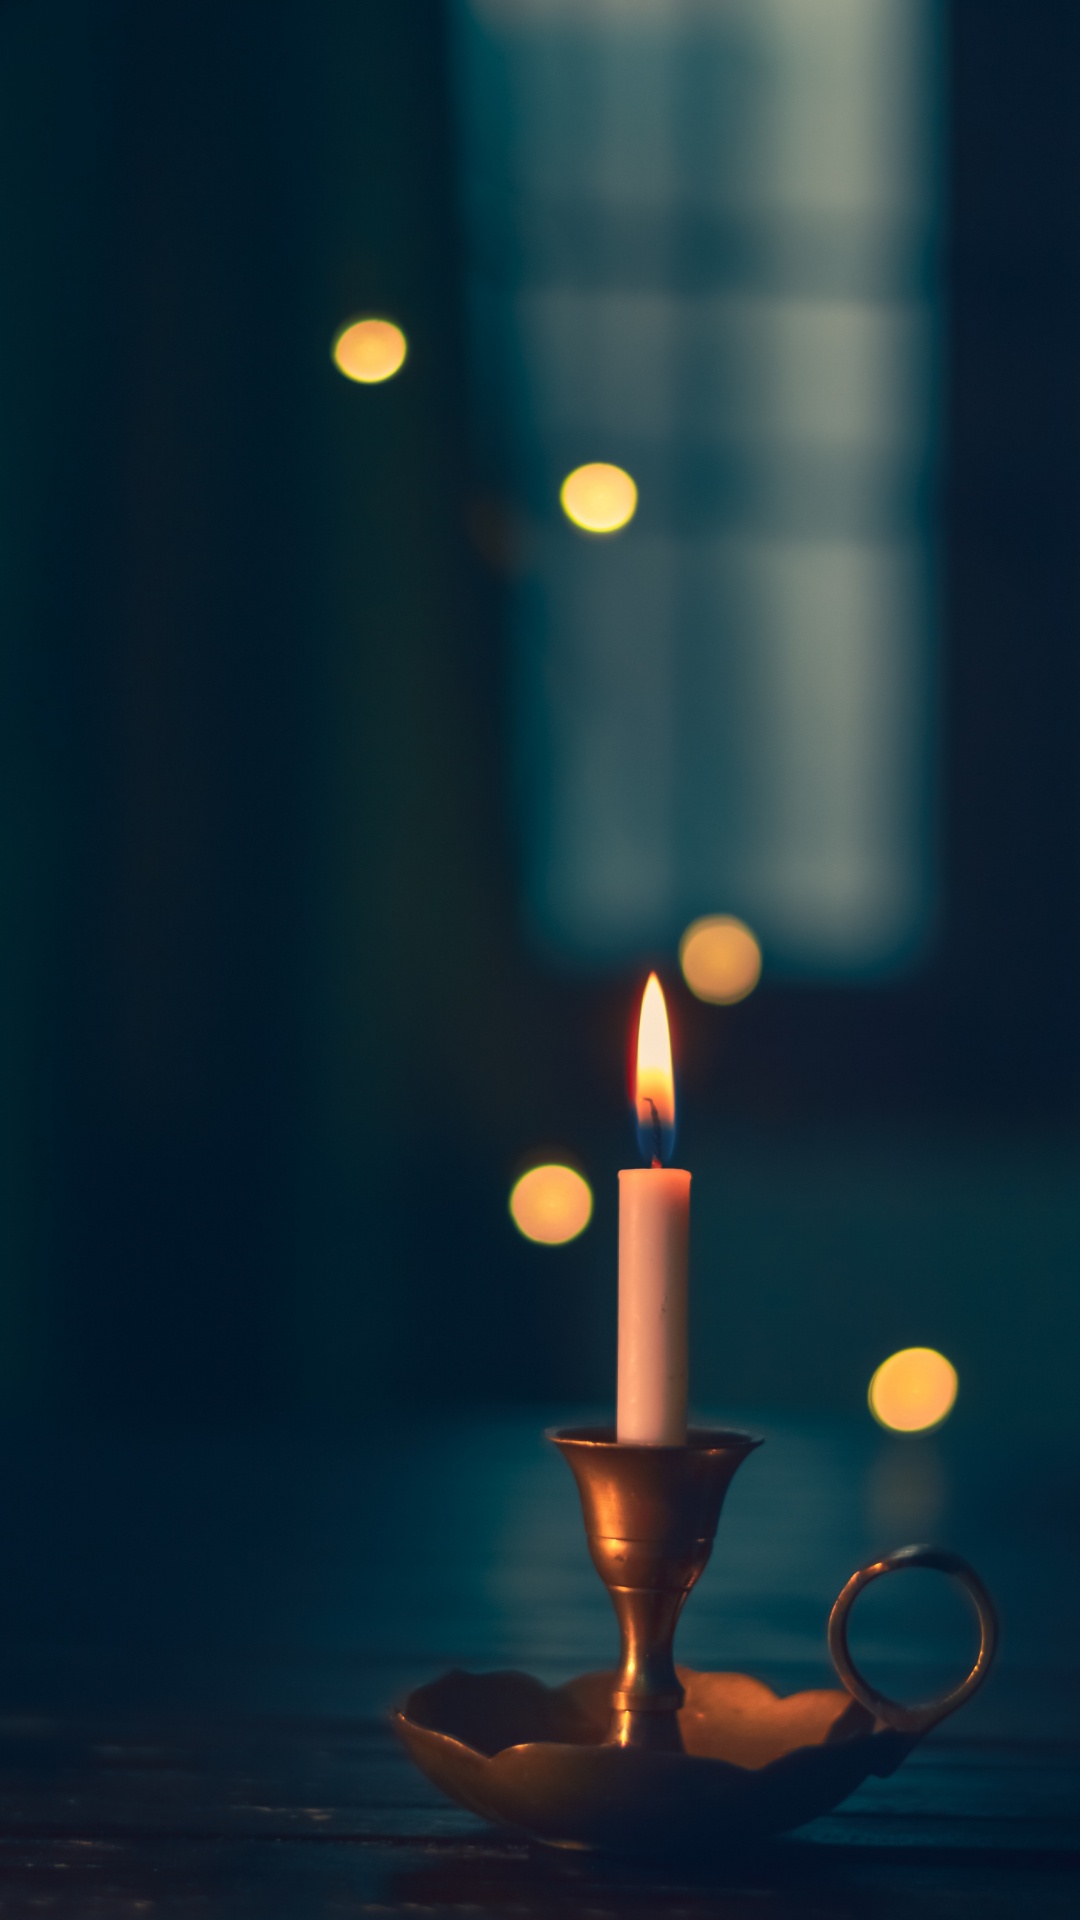 Lighted Candle in Black Holder. Wallpaper in 1080x1920 Resolution